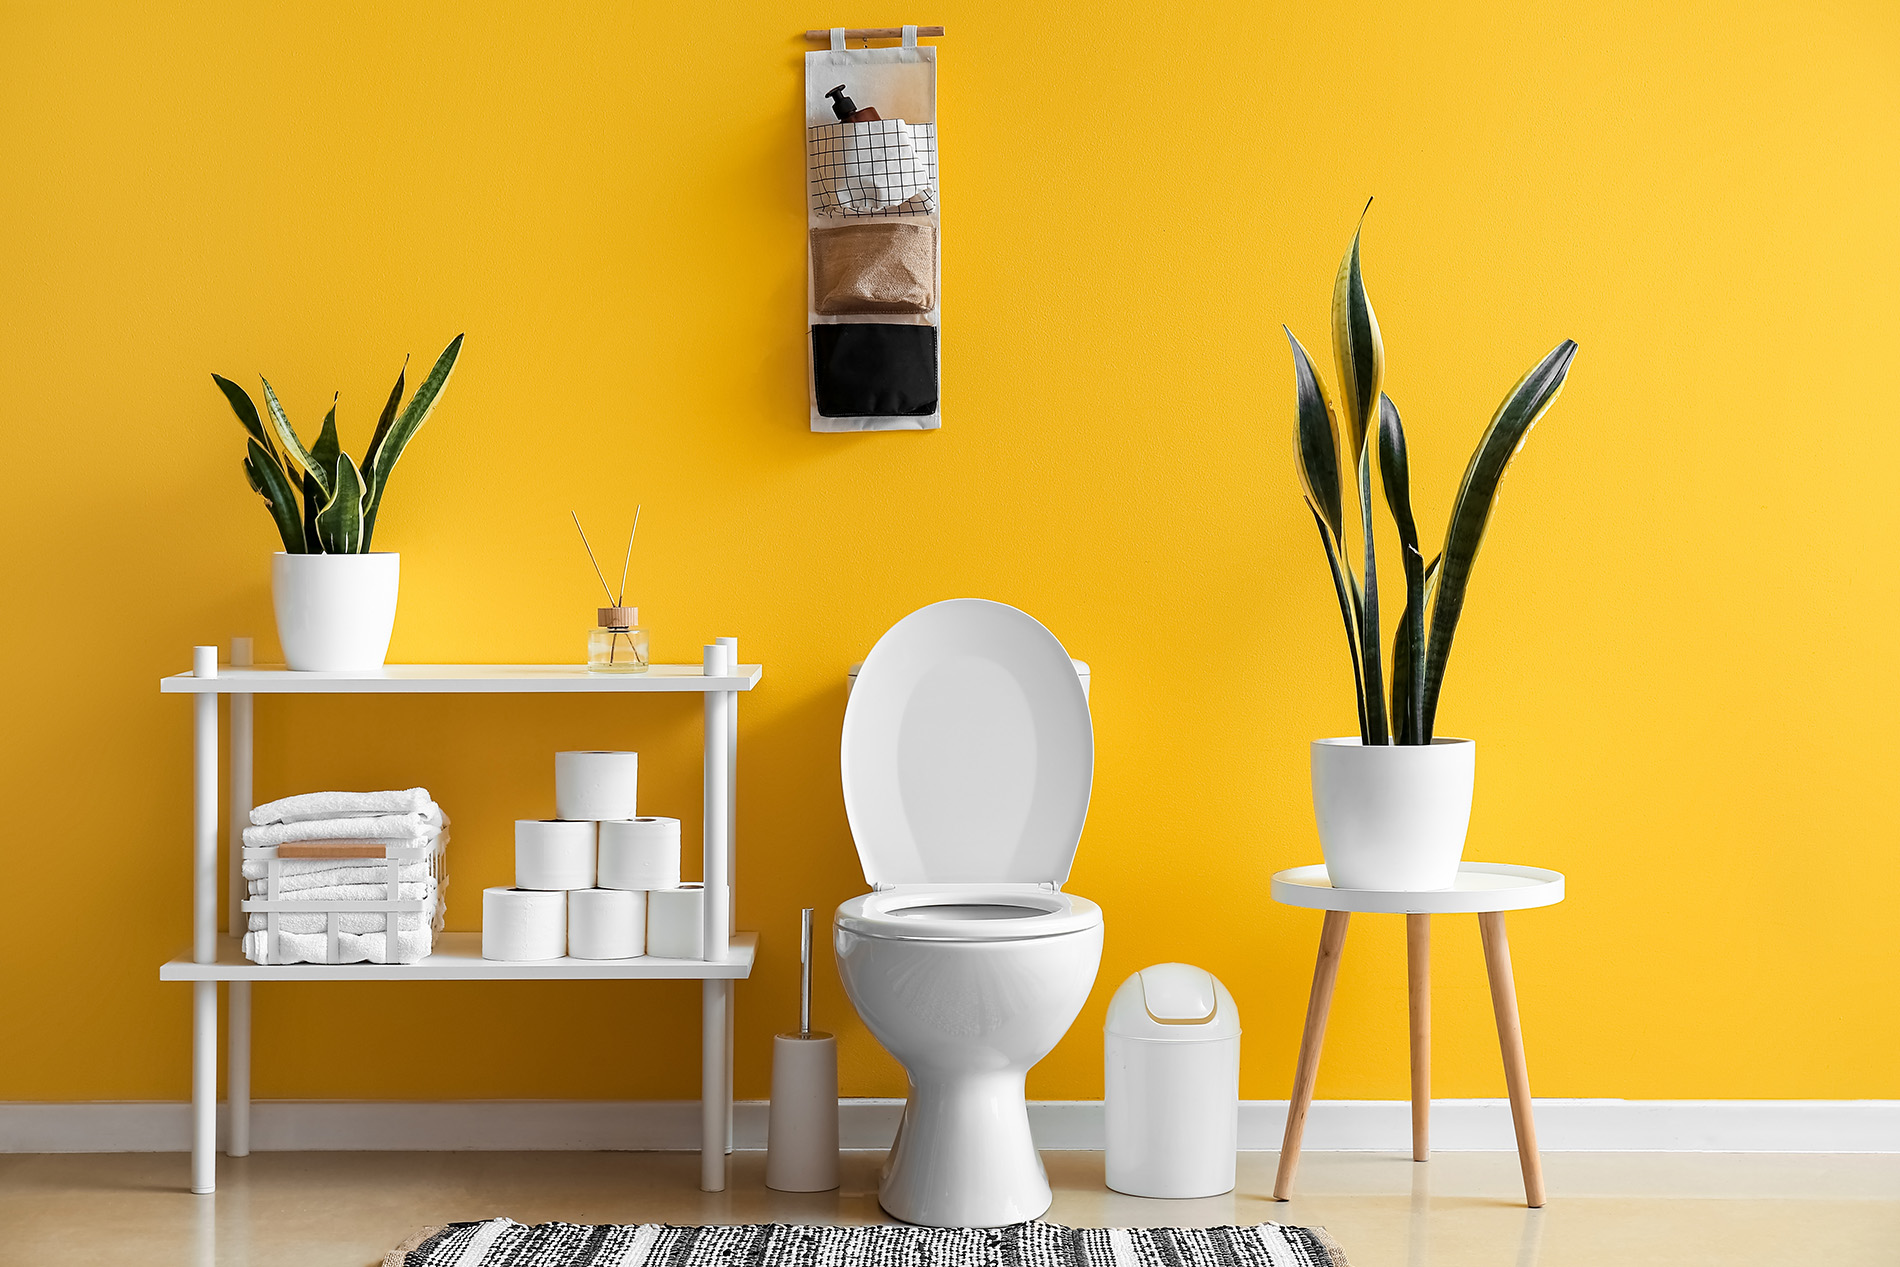 Home bathroom with toilet, shelves, towels and orange walls